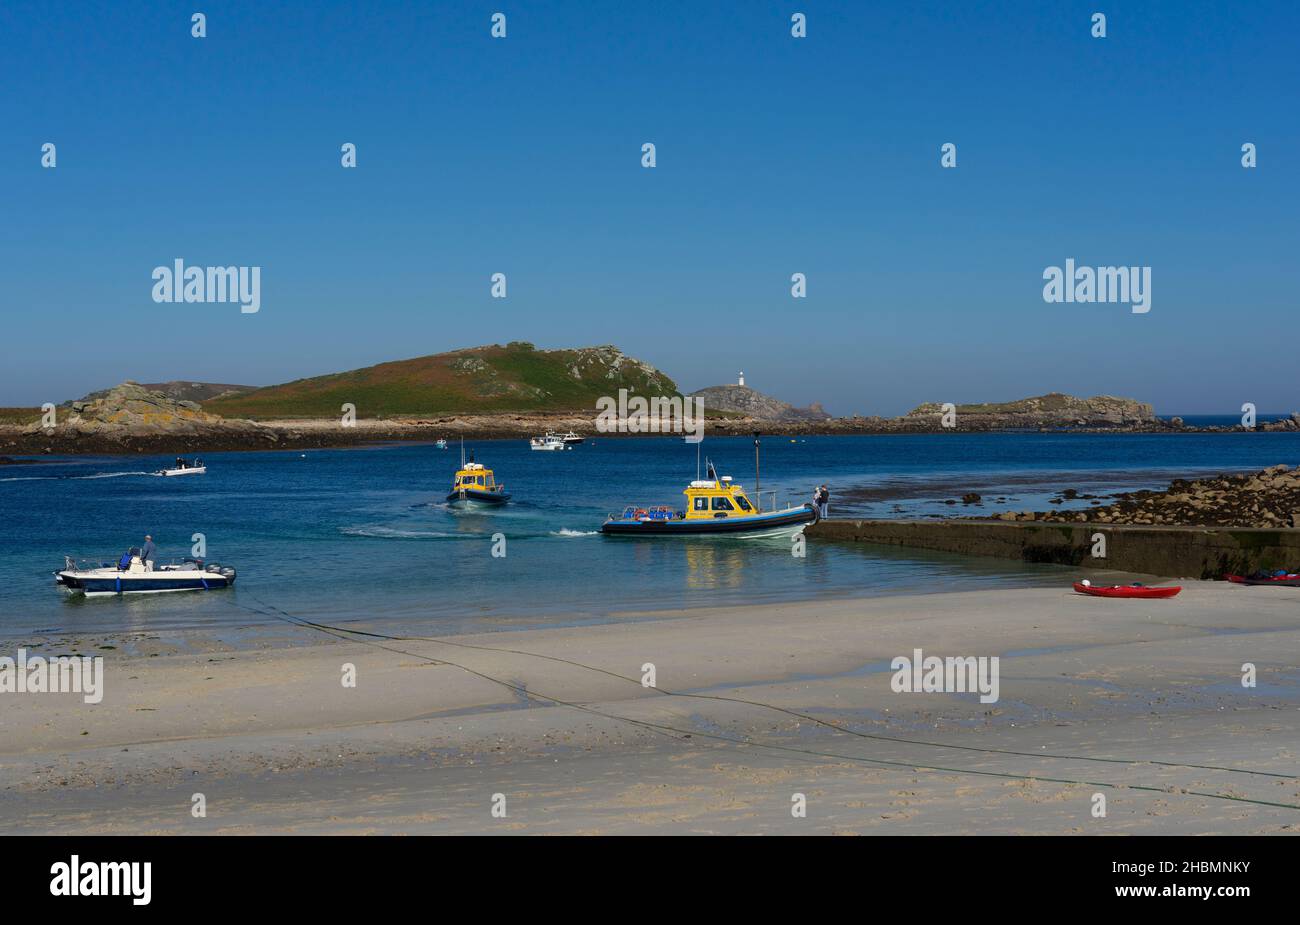 St. Martins, Isles of Scilly, England Stockfoto